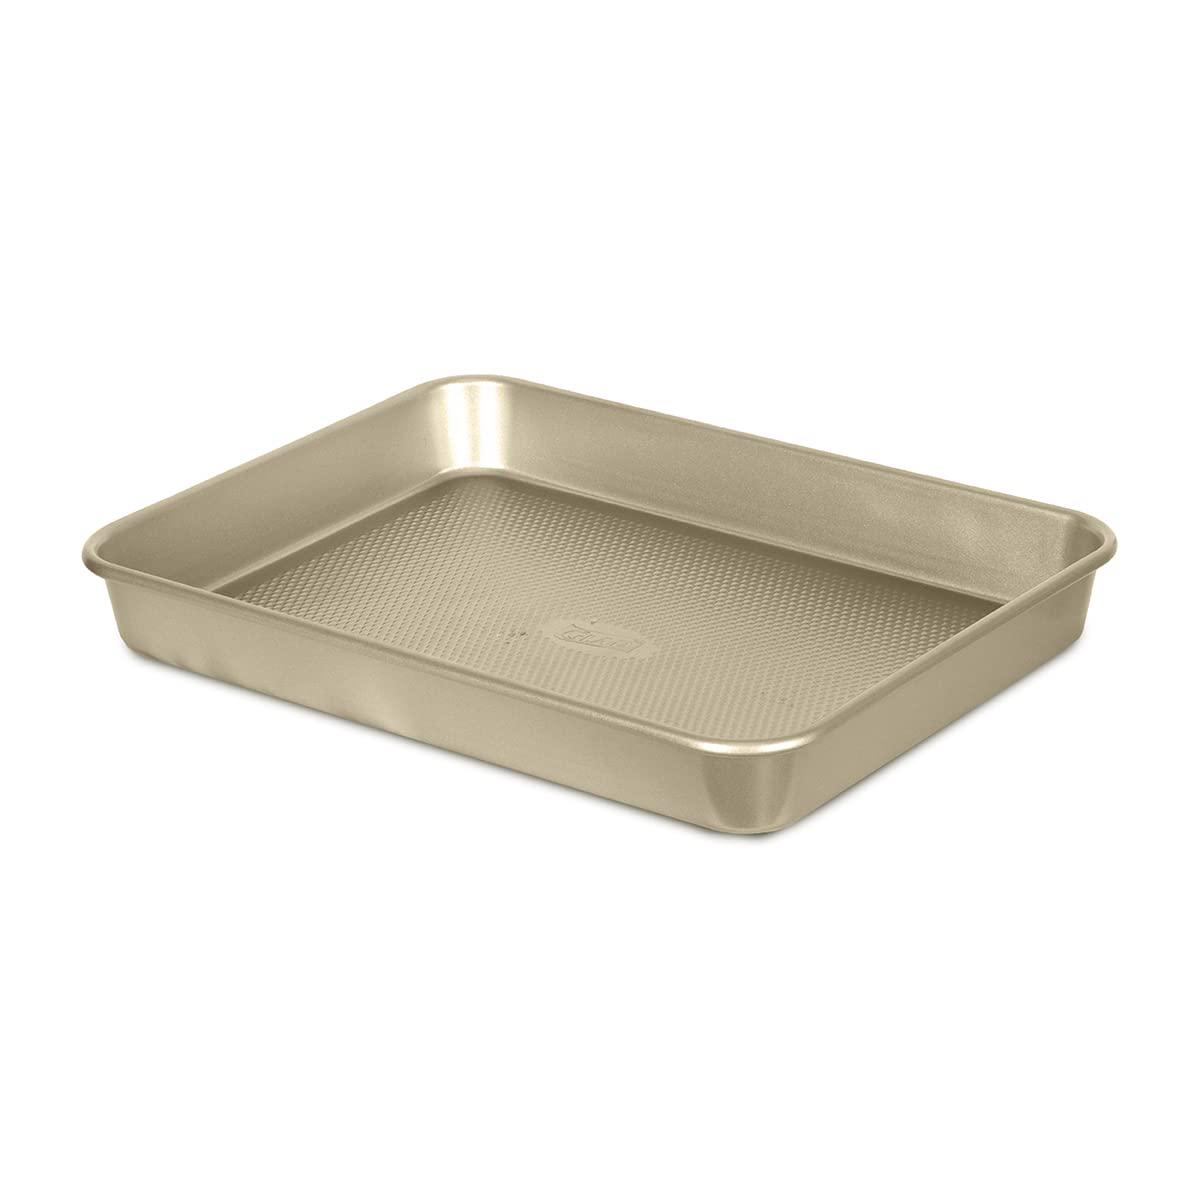 Glad glad baking pan nonstick - oblong metal dish for cake and